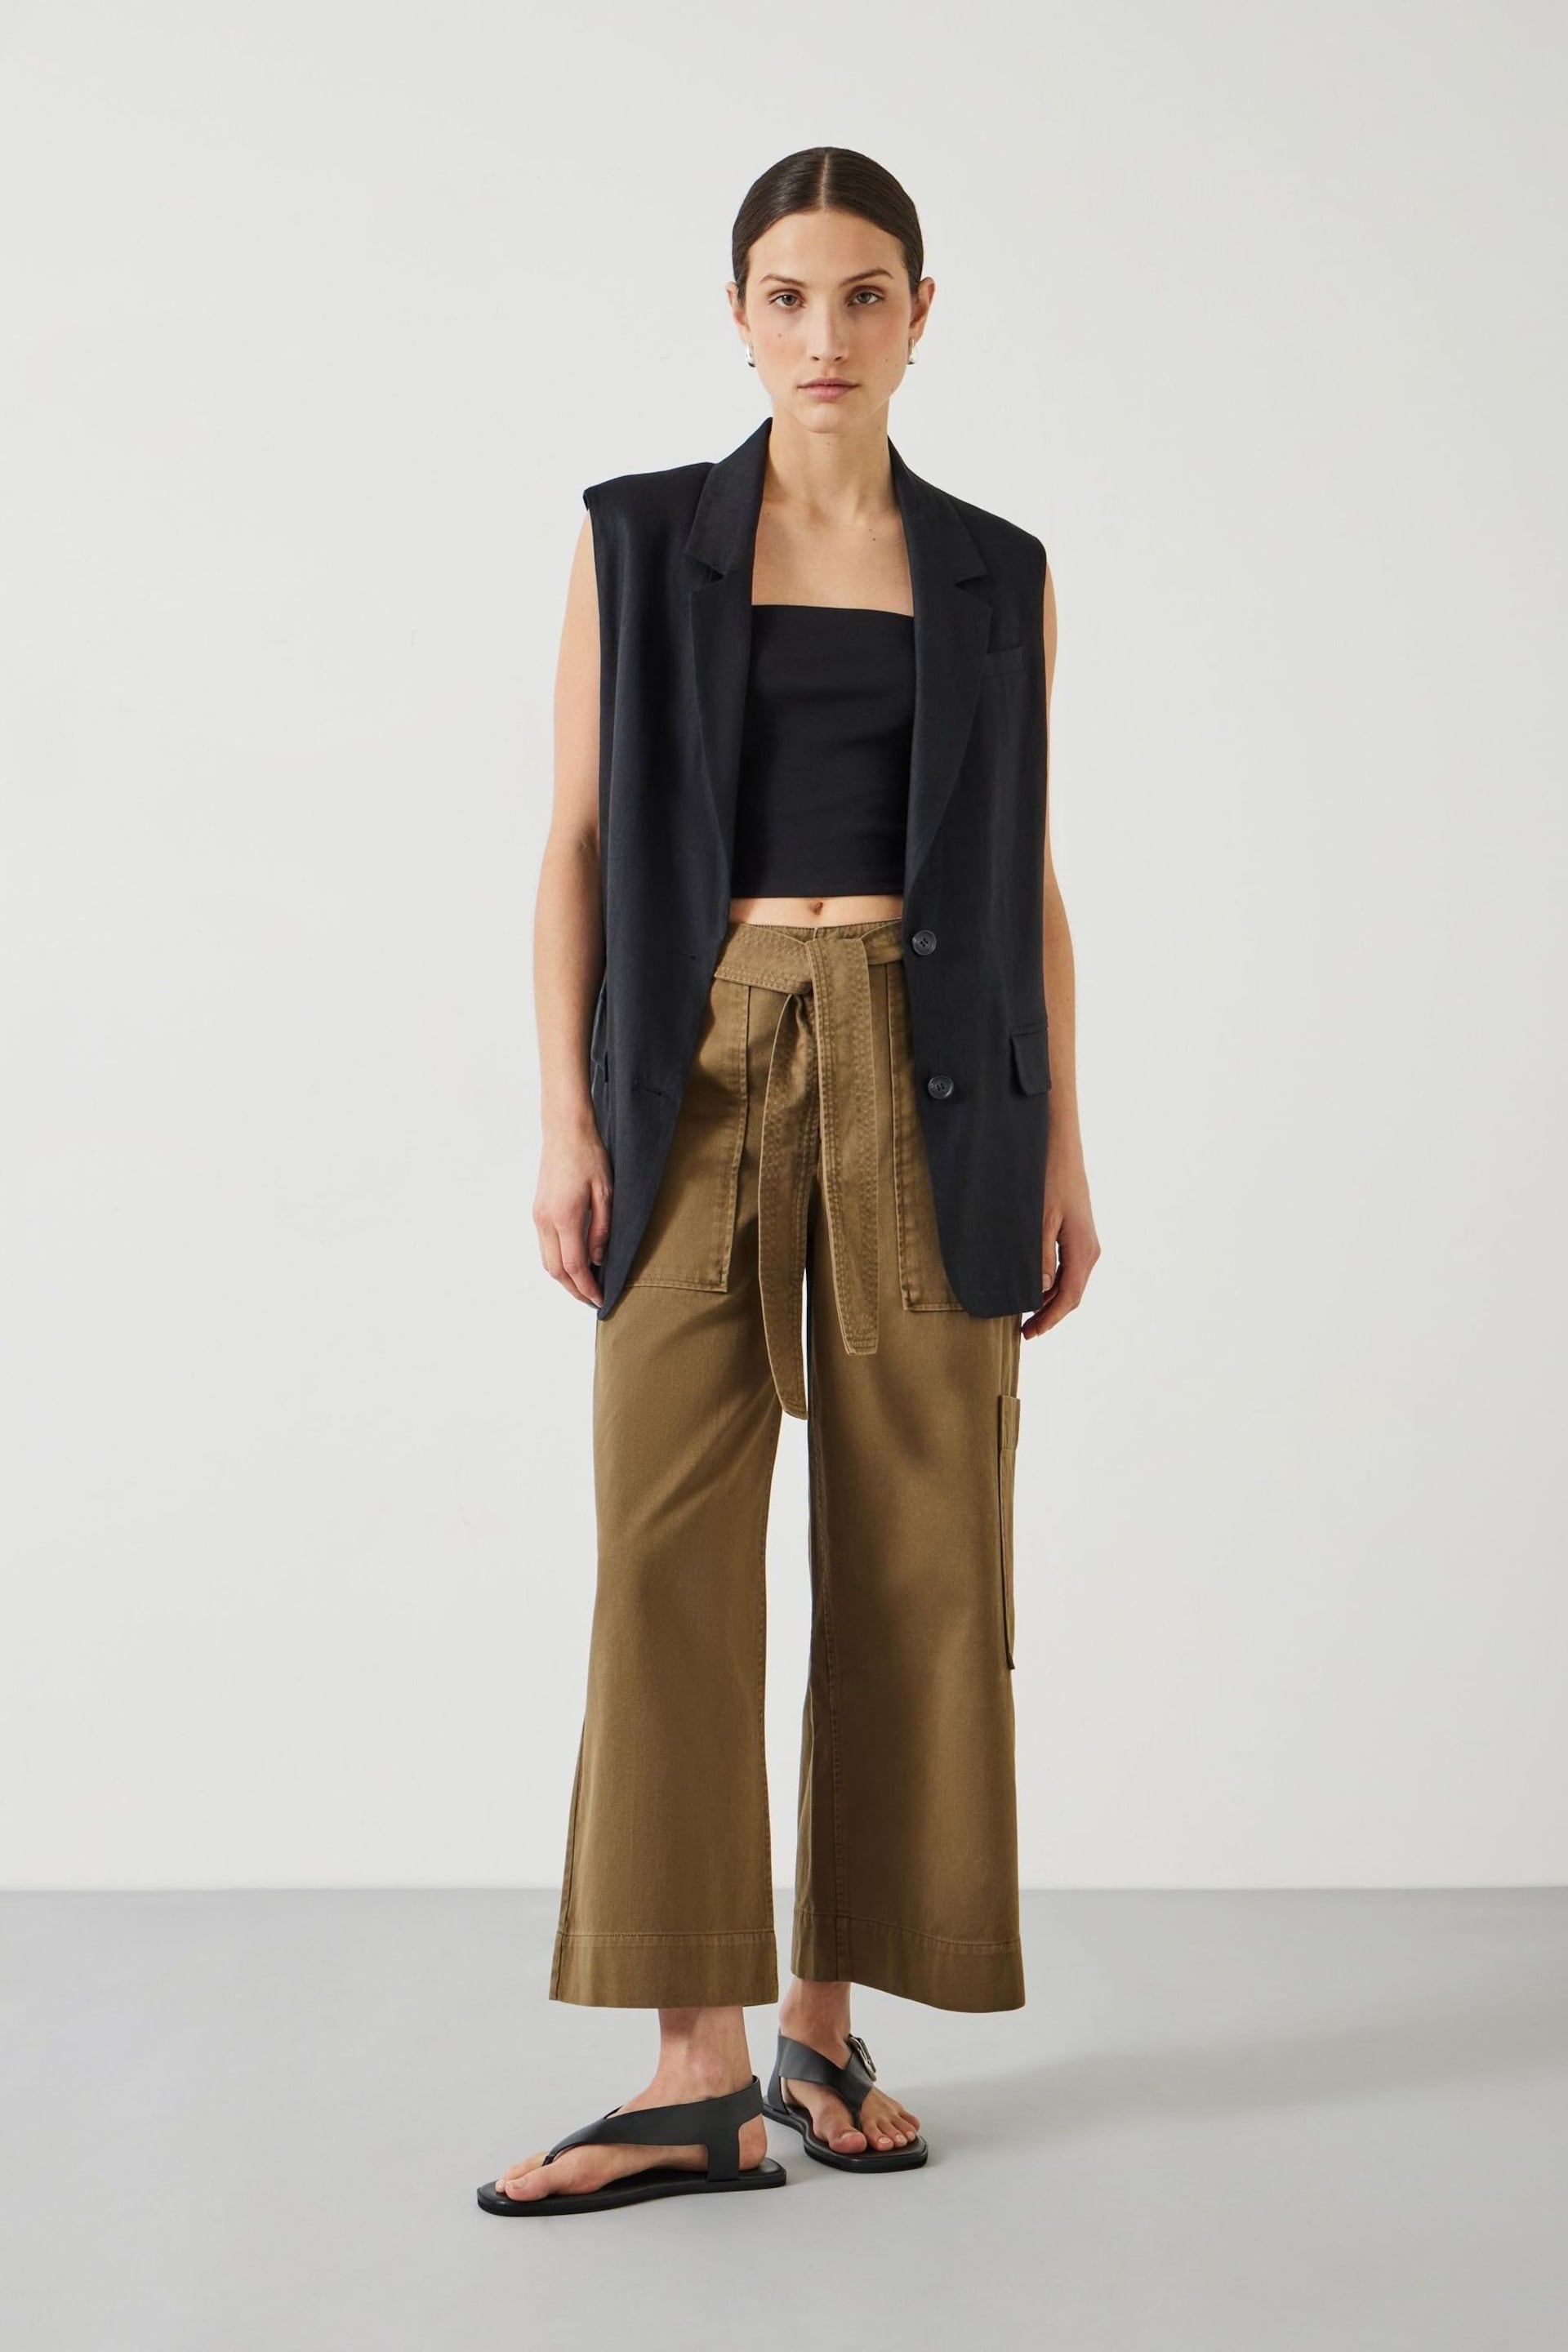 Hush Green Annie Ankle Grazer Trousers - Image 1 of 5